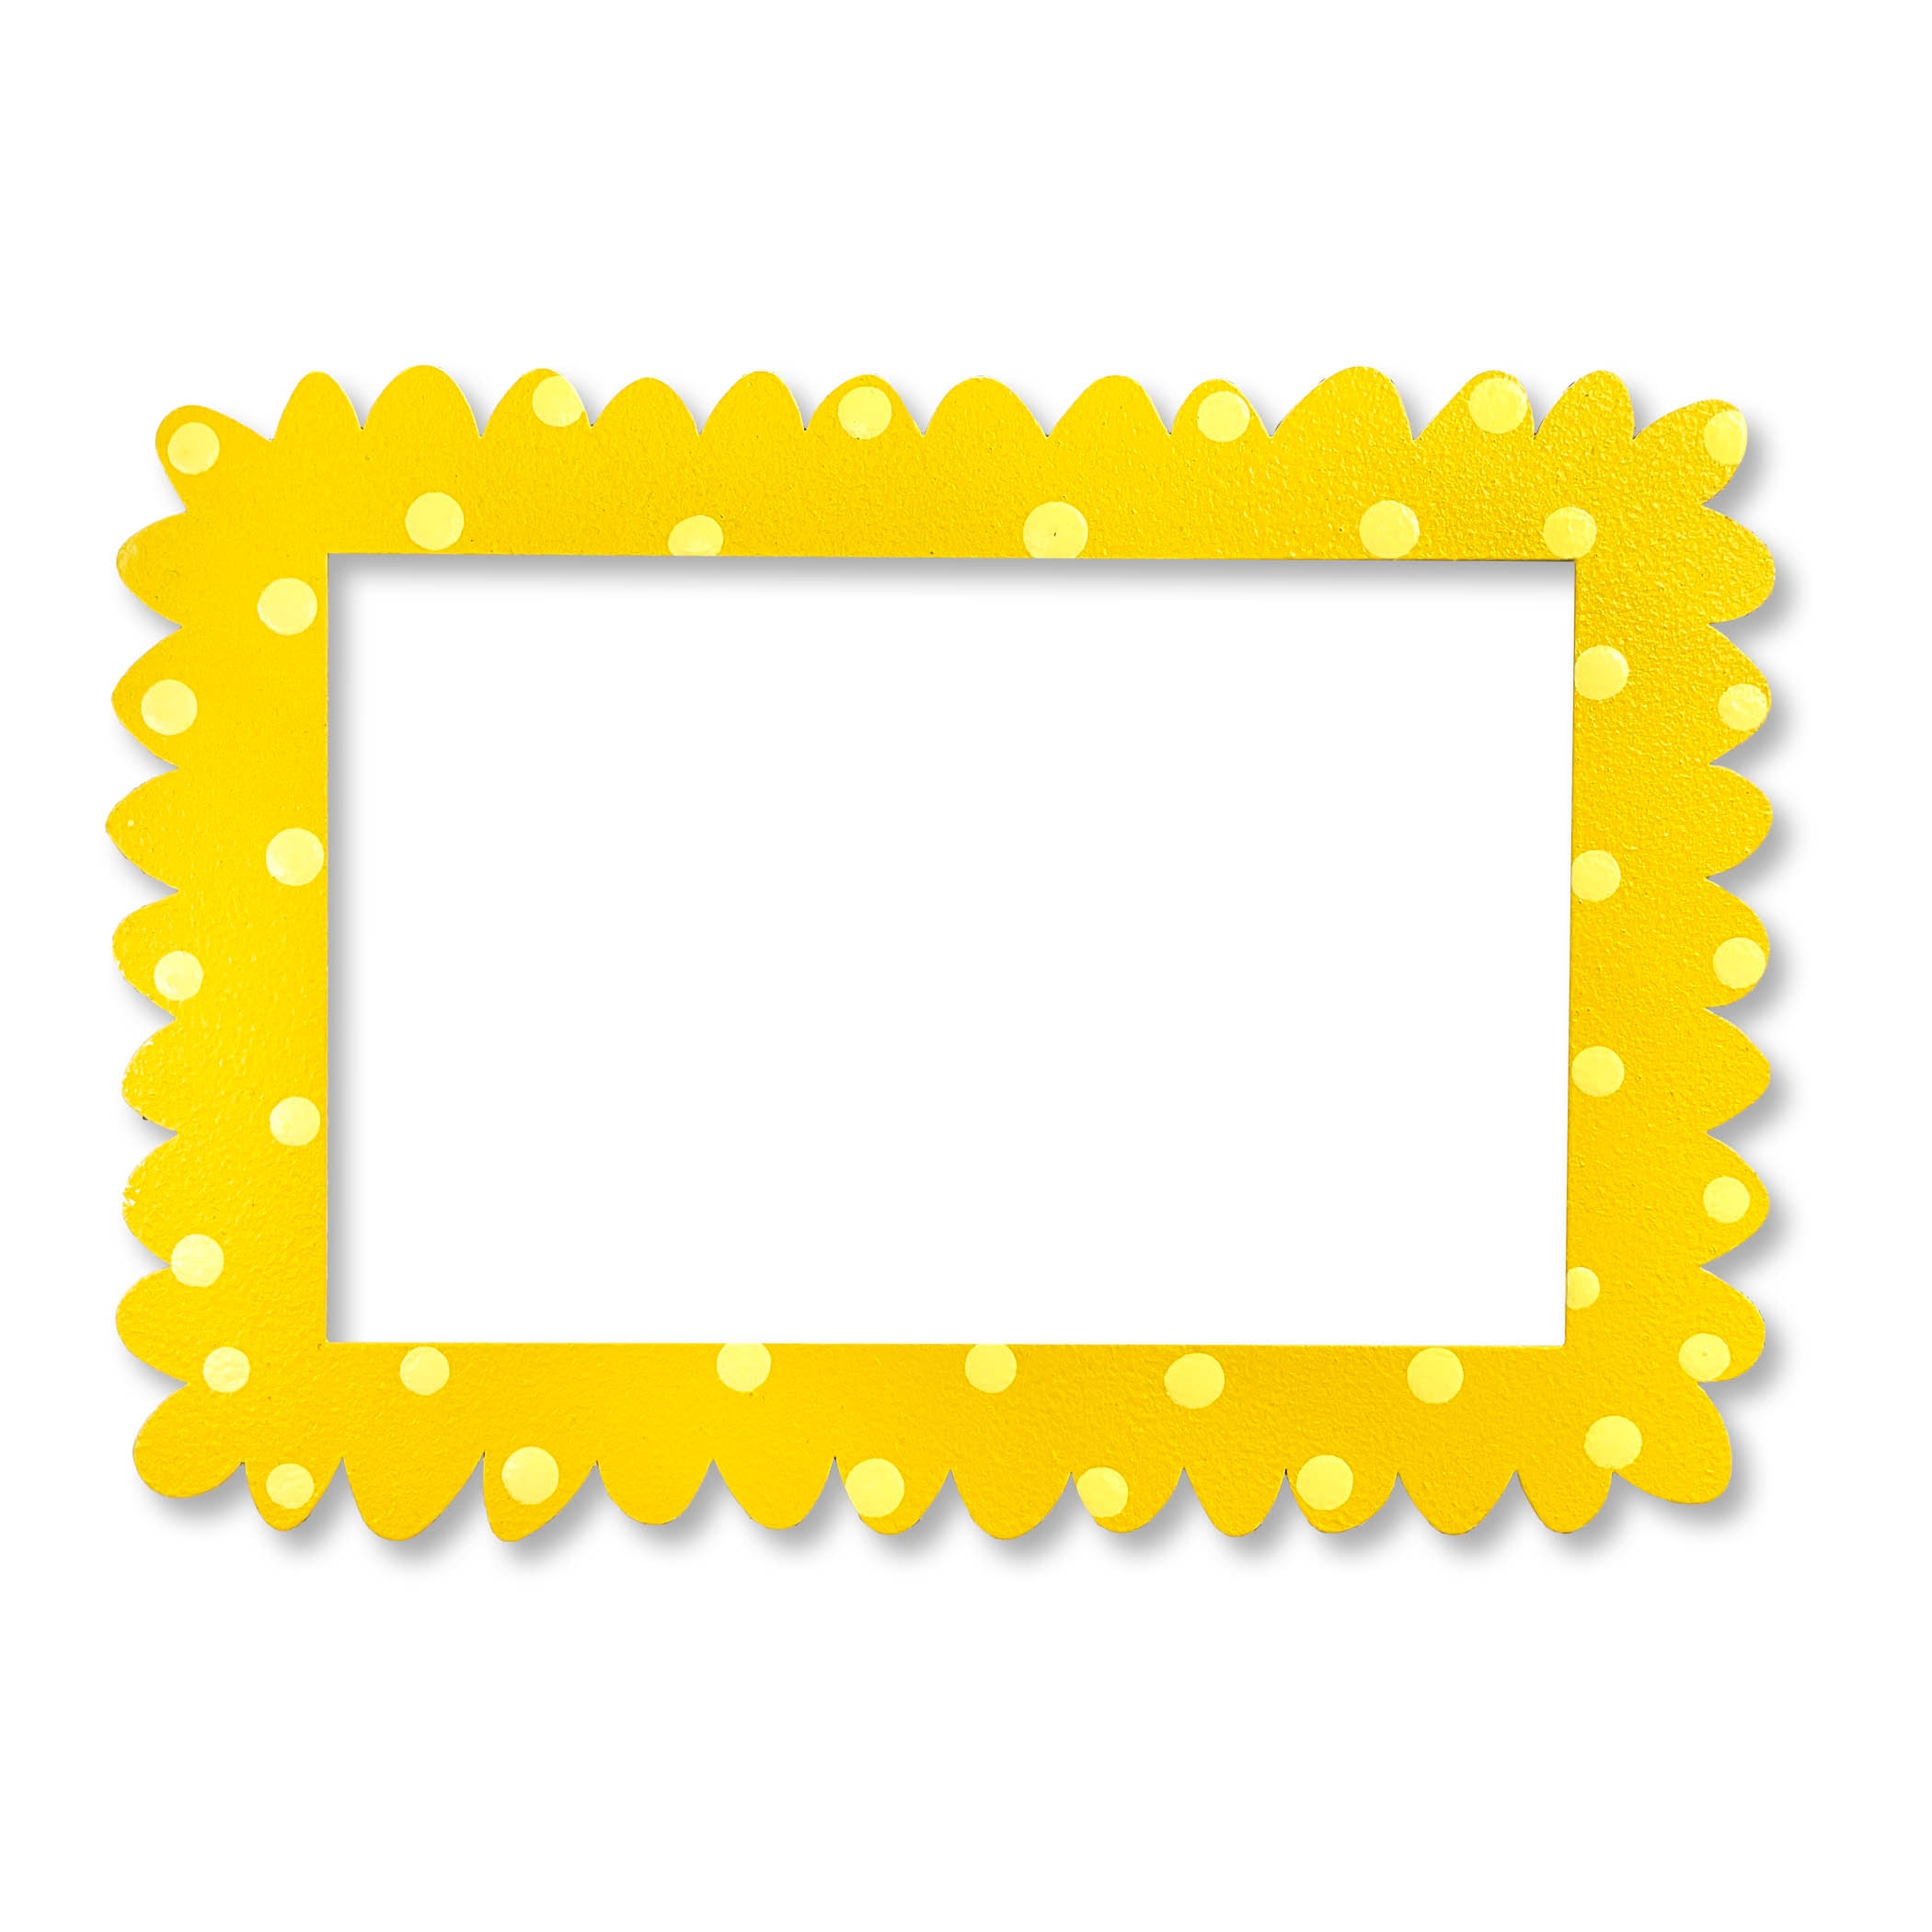 5x7 Scalloped Frame - Patterned